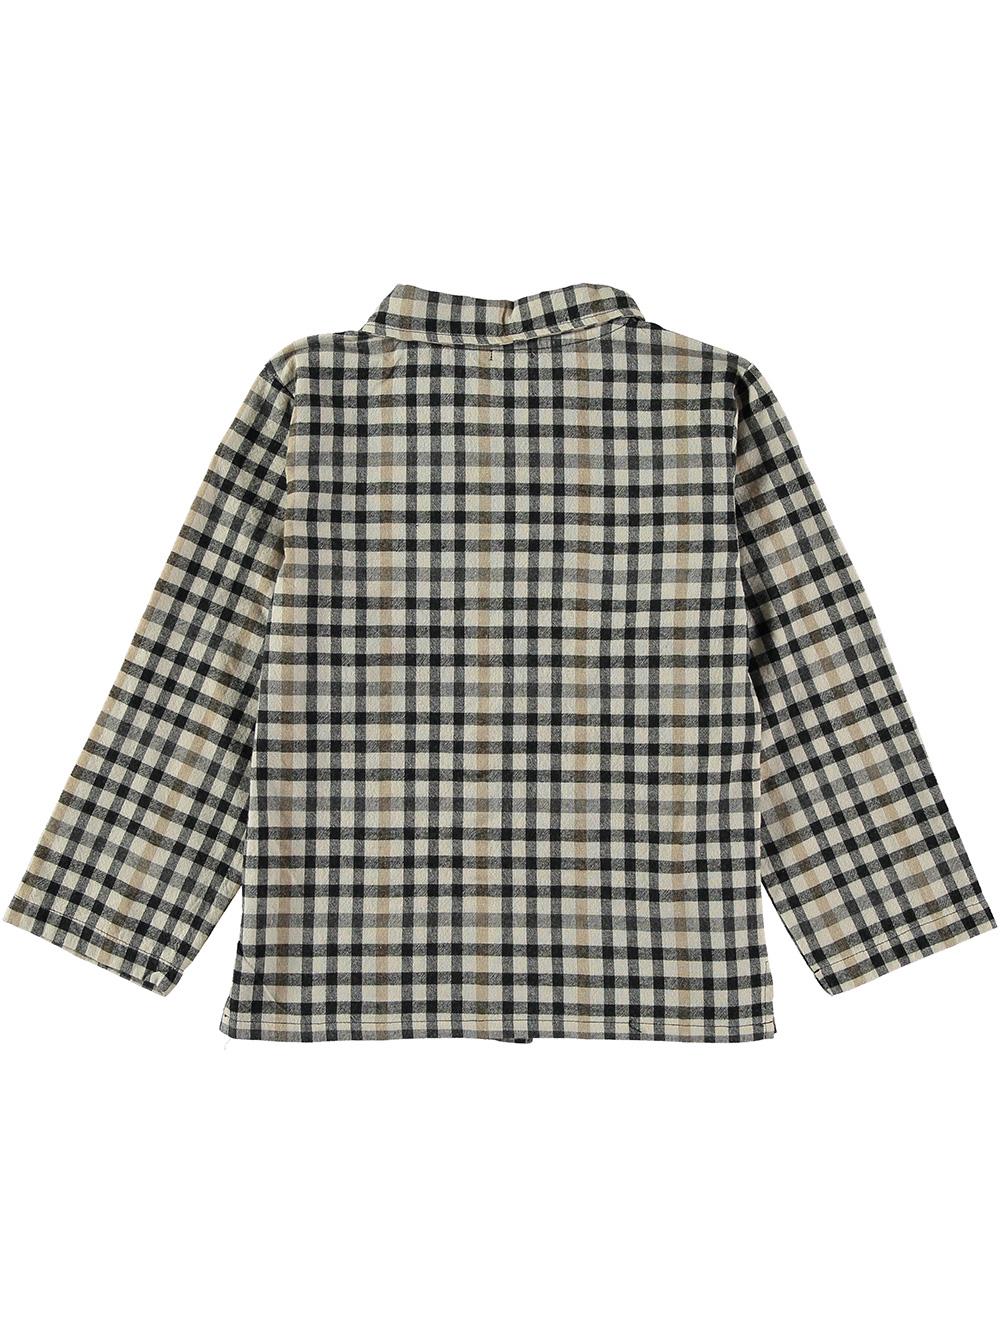 PICNIK TEAM EMBROIDERED CHECKED SHIRT